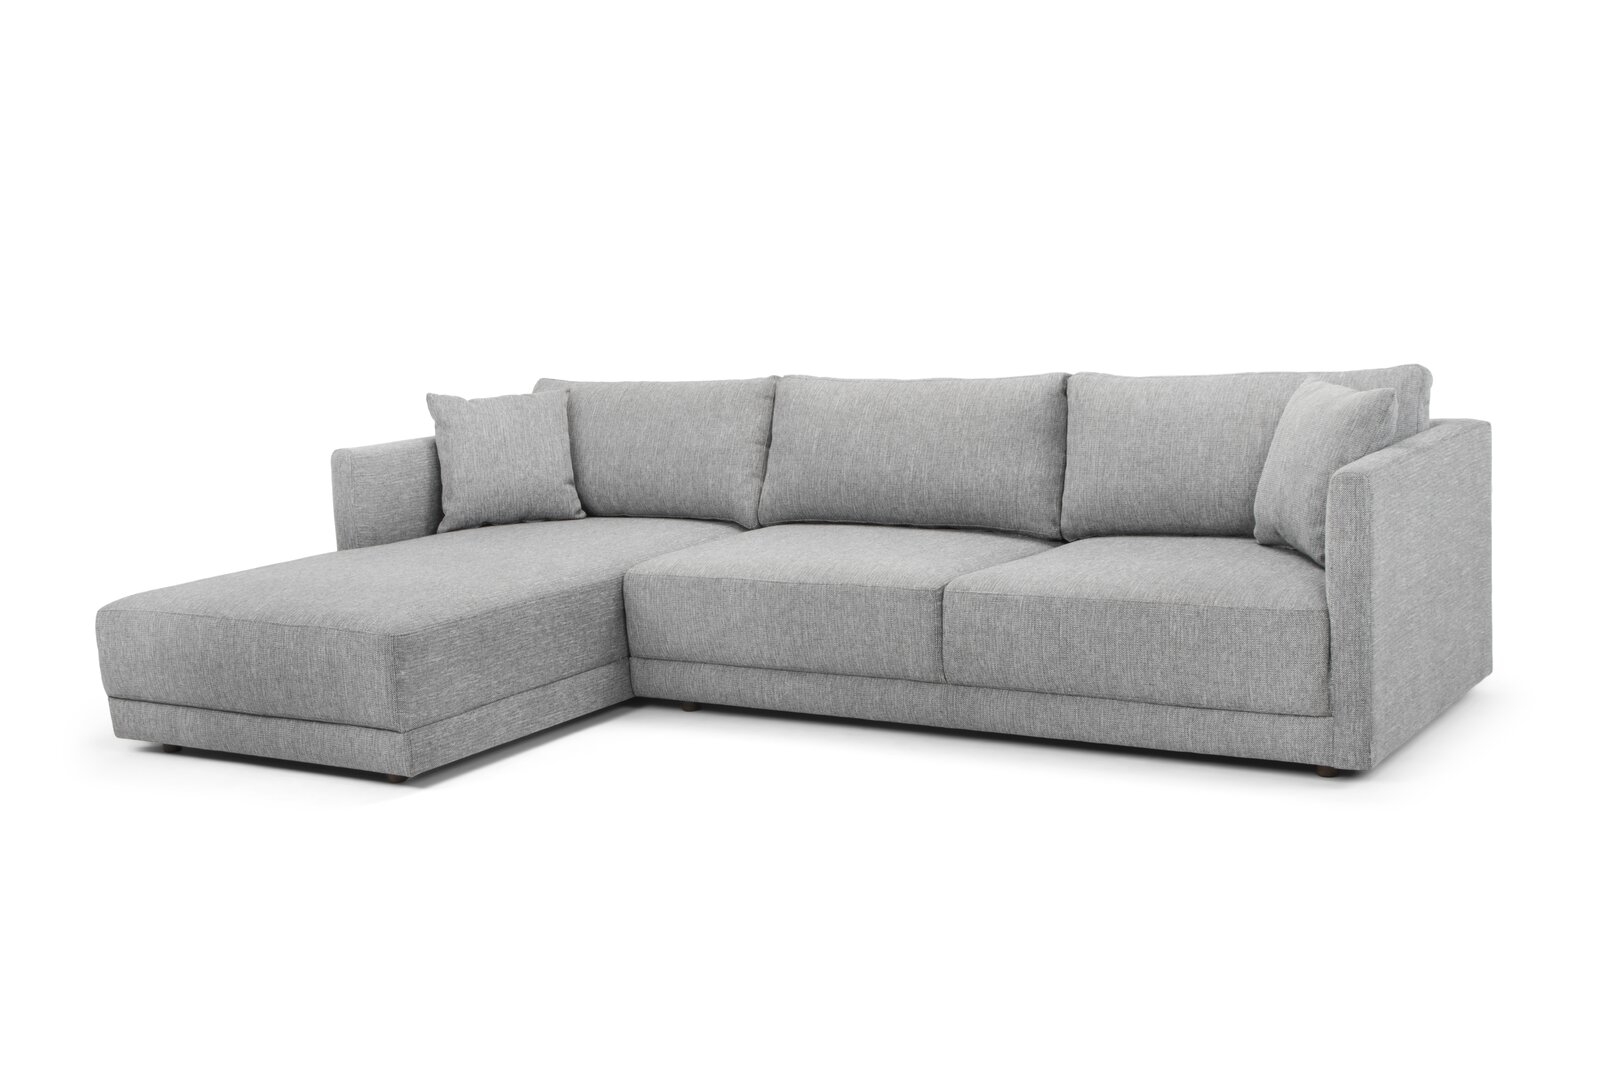 116.14" Wide Sofa & Chaise Gray right hand facing - Image 5